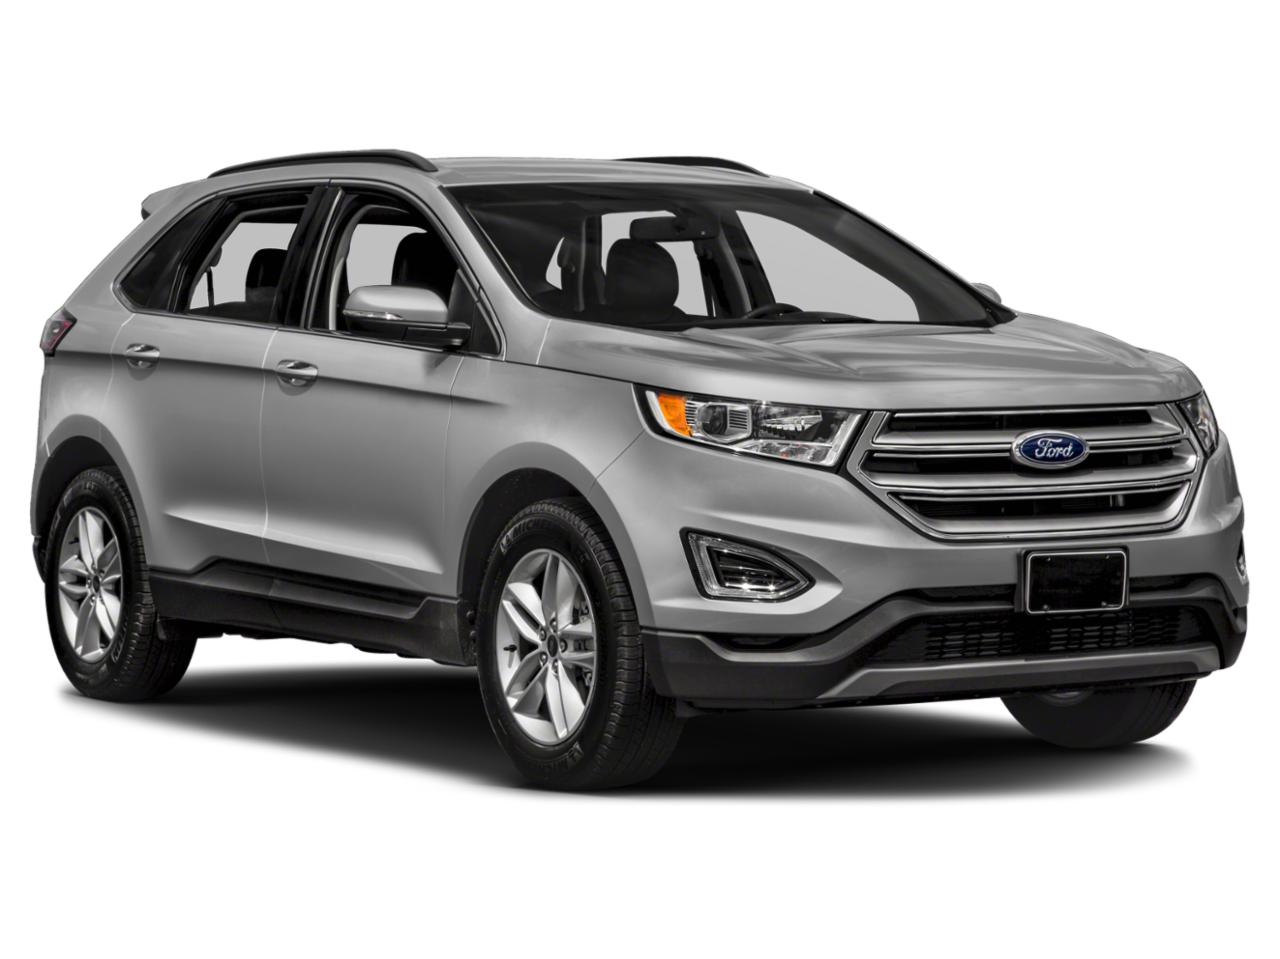 2015 Ford Edge Vehicle Photo in Grapevine, TX 76051